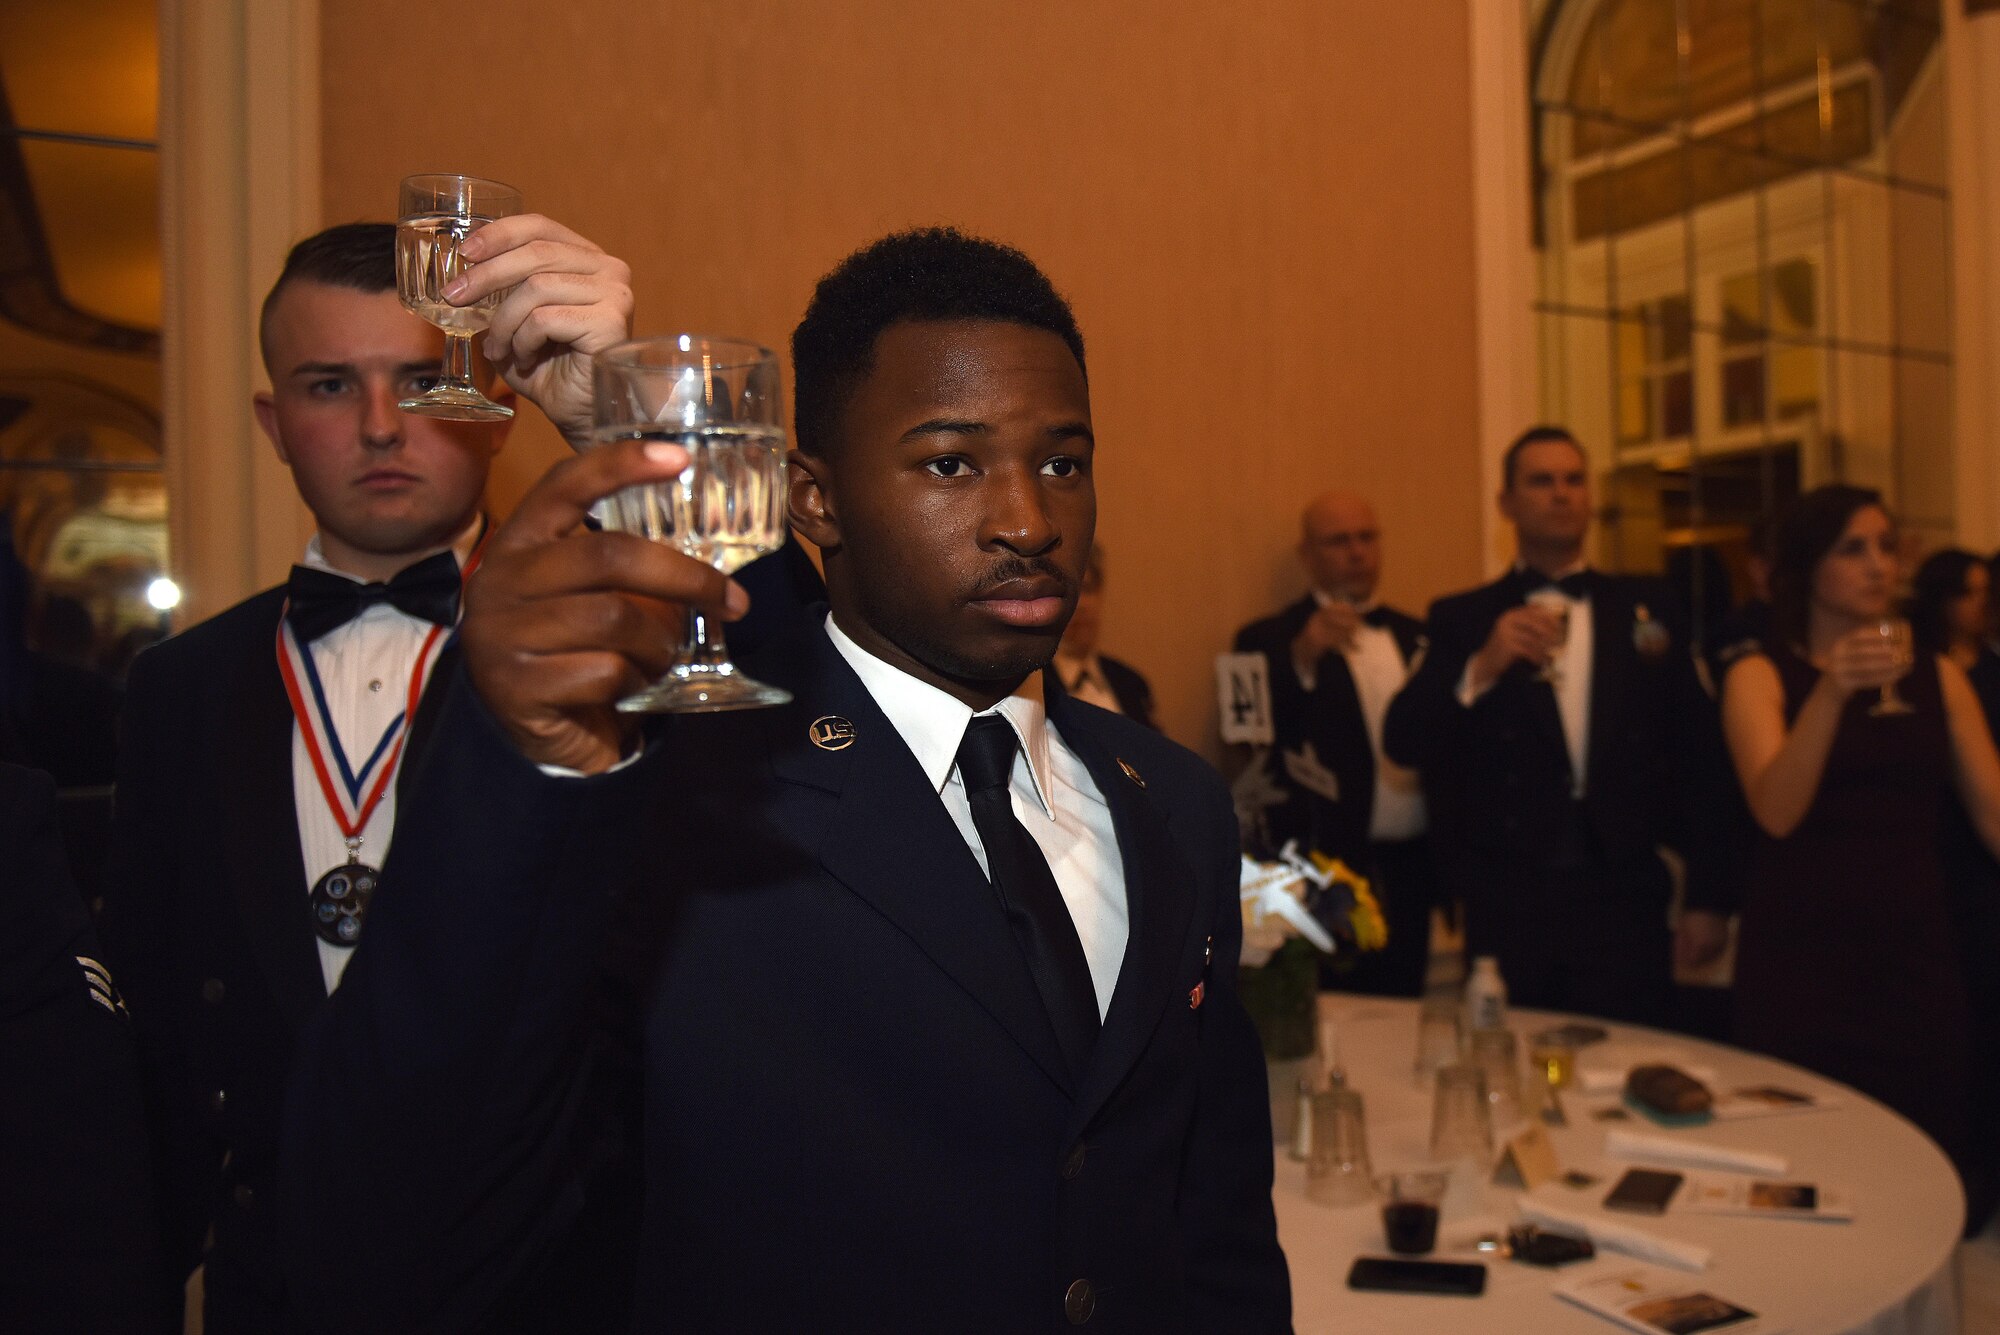 Goodfellow members raise their glass in honor of fallen service members during the Annual Awards Banquet at the Cactus Hotel in San Angelo, Texas, Feb. 3, 2017. Annual Award nominees wore their medallions and stood during the ceremony for special recognitions. (U.S. Air Force photo by Airman 1st Class Caelynn Ferguson/Released)